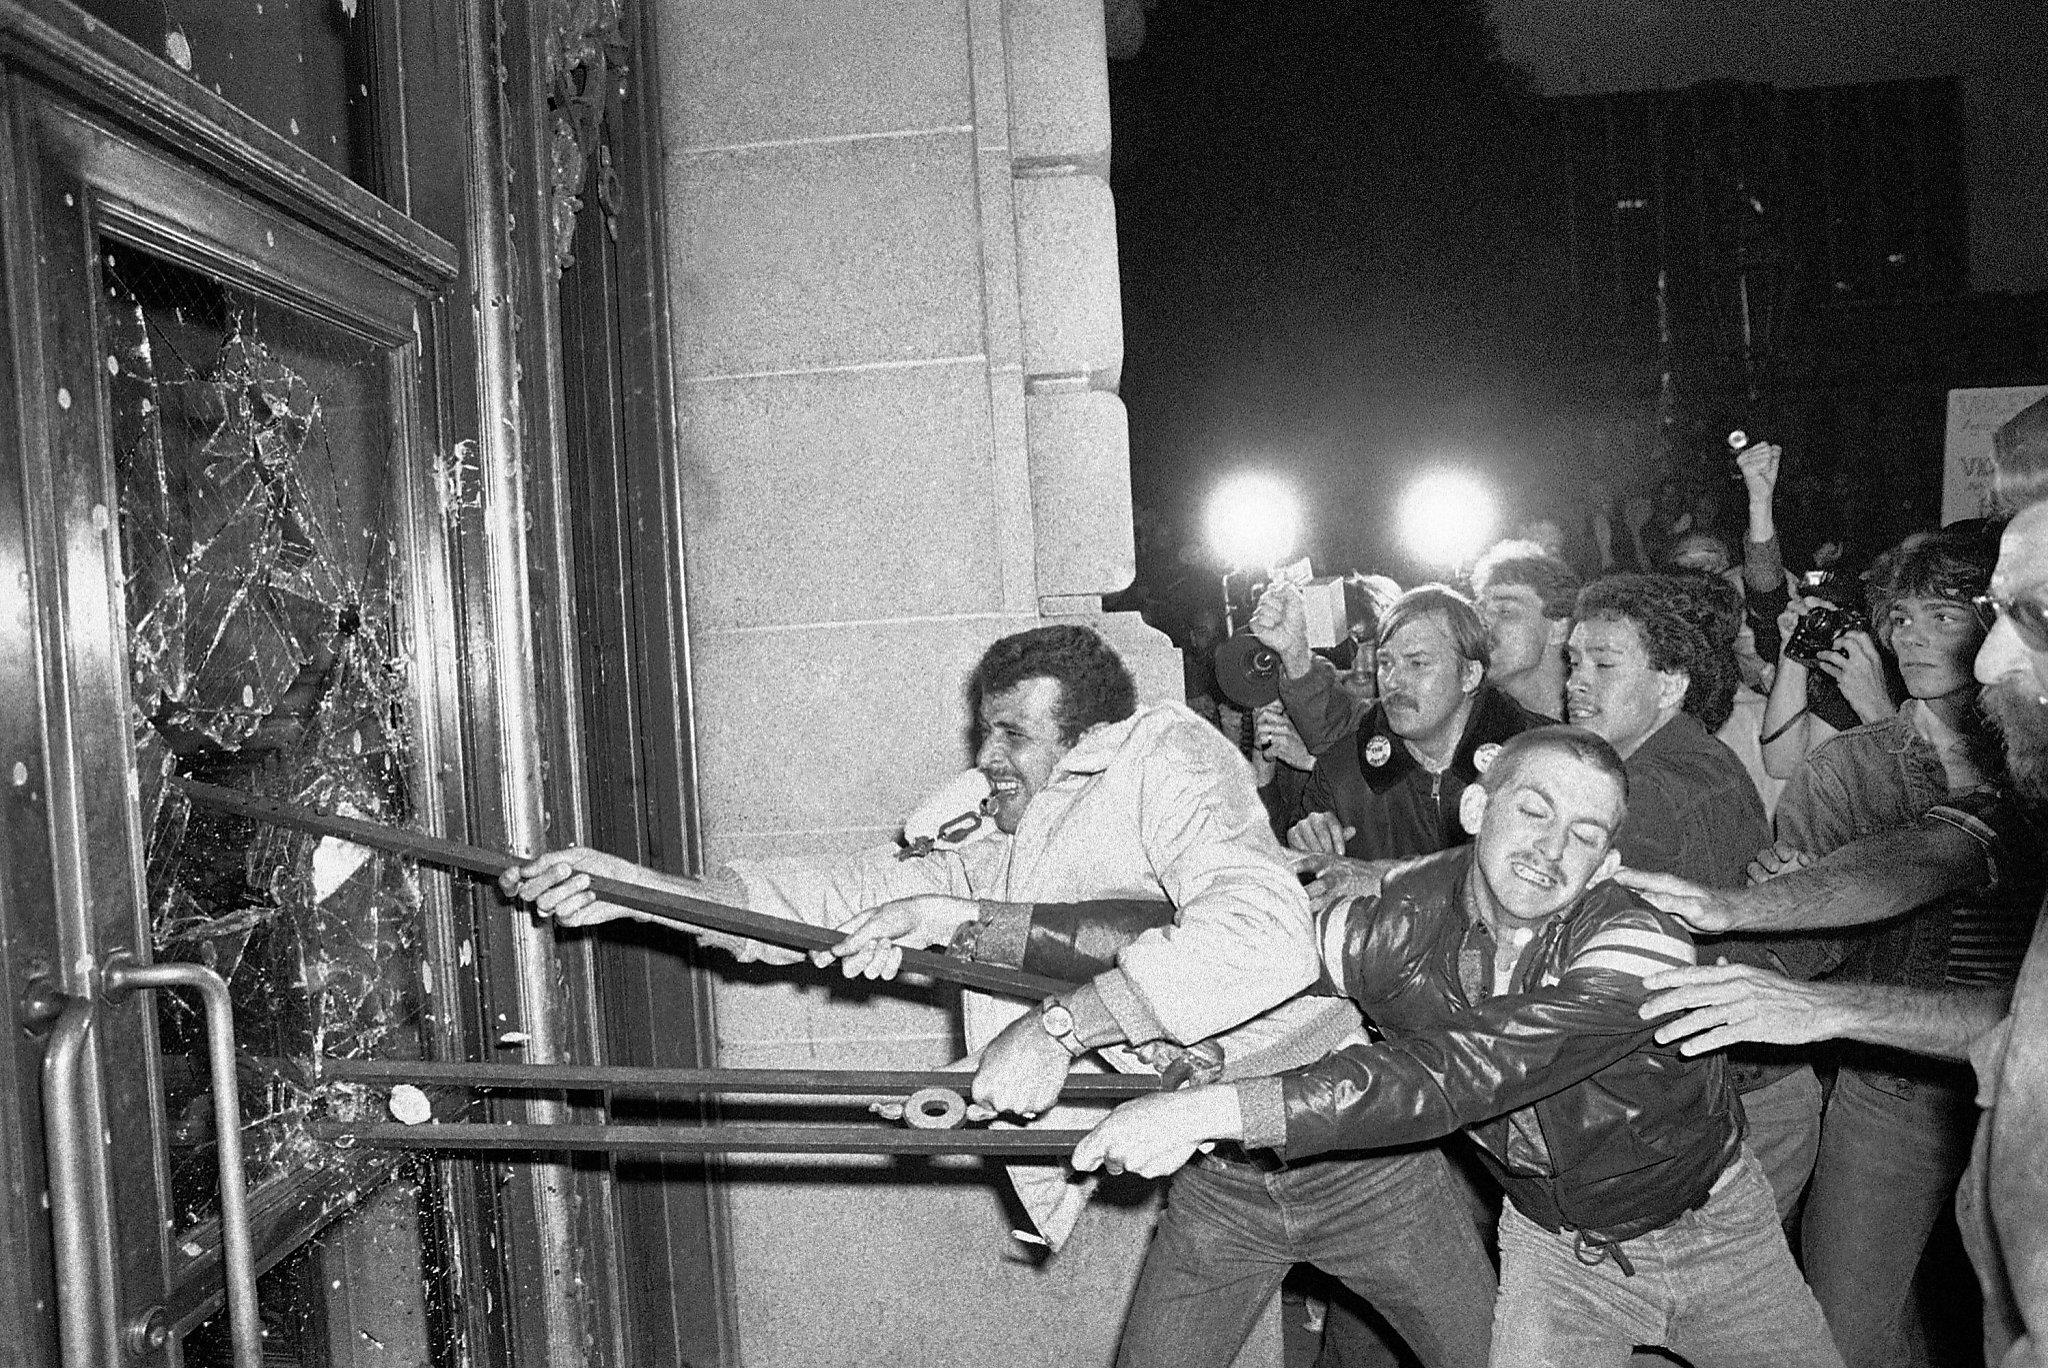 The White Night riot of 1979